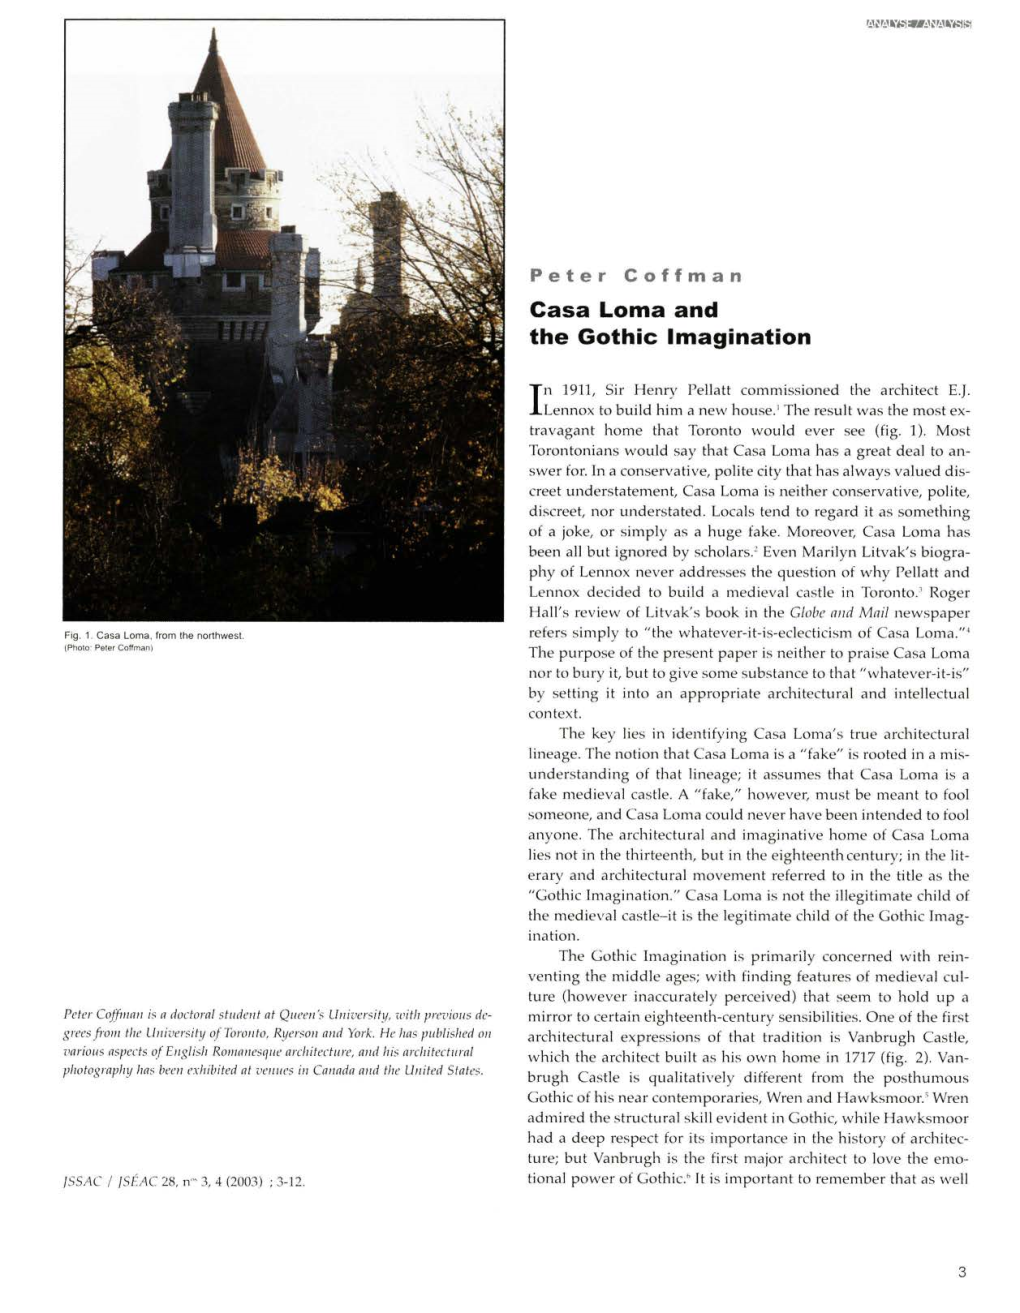 Casa Loma and the Gothic Imagination